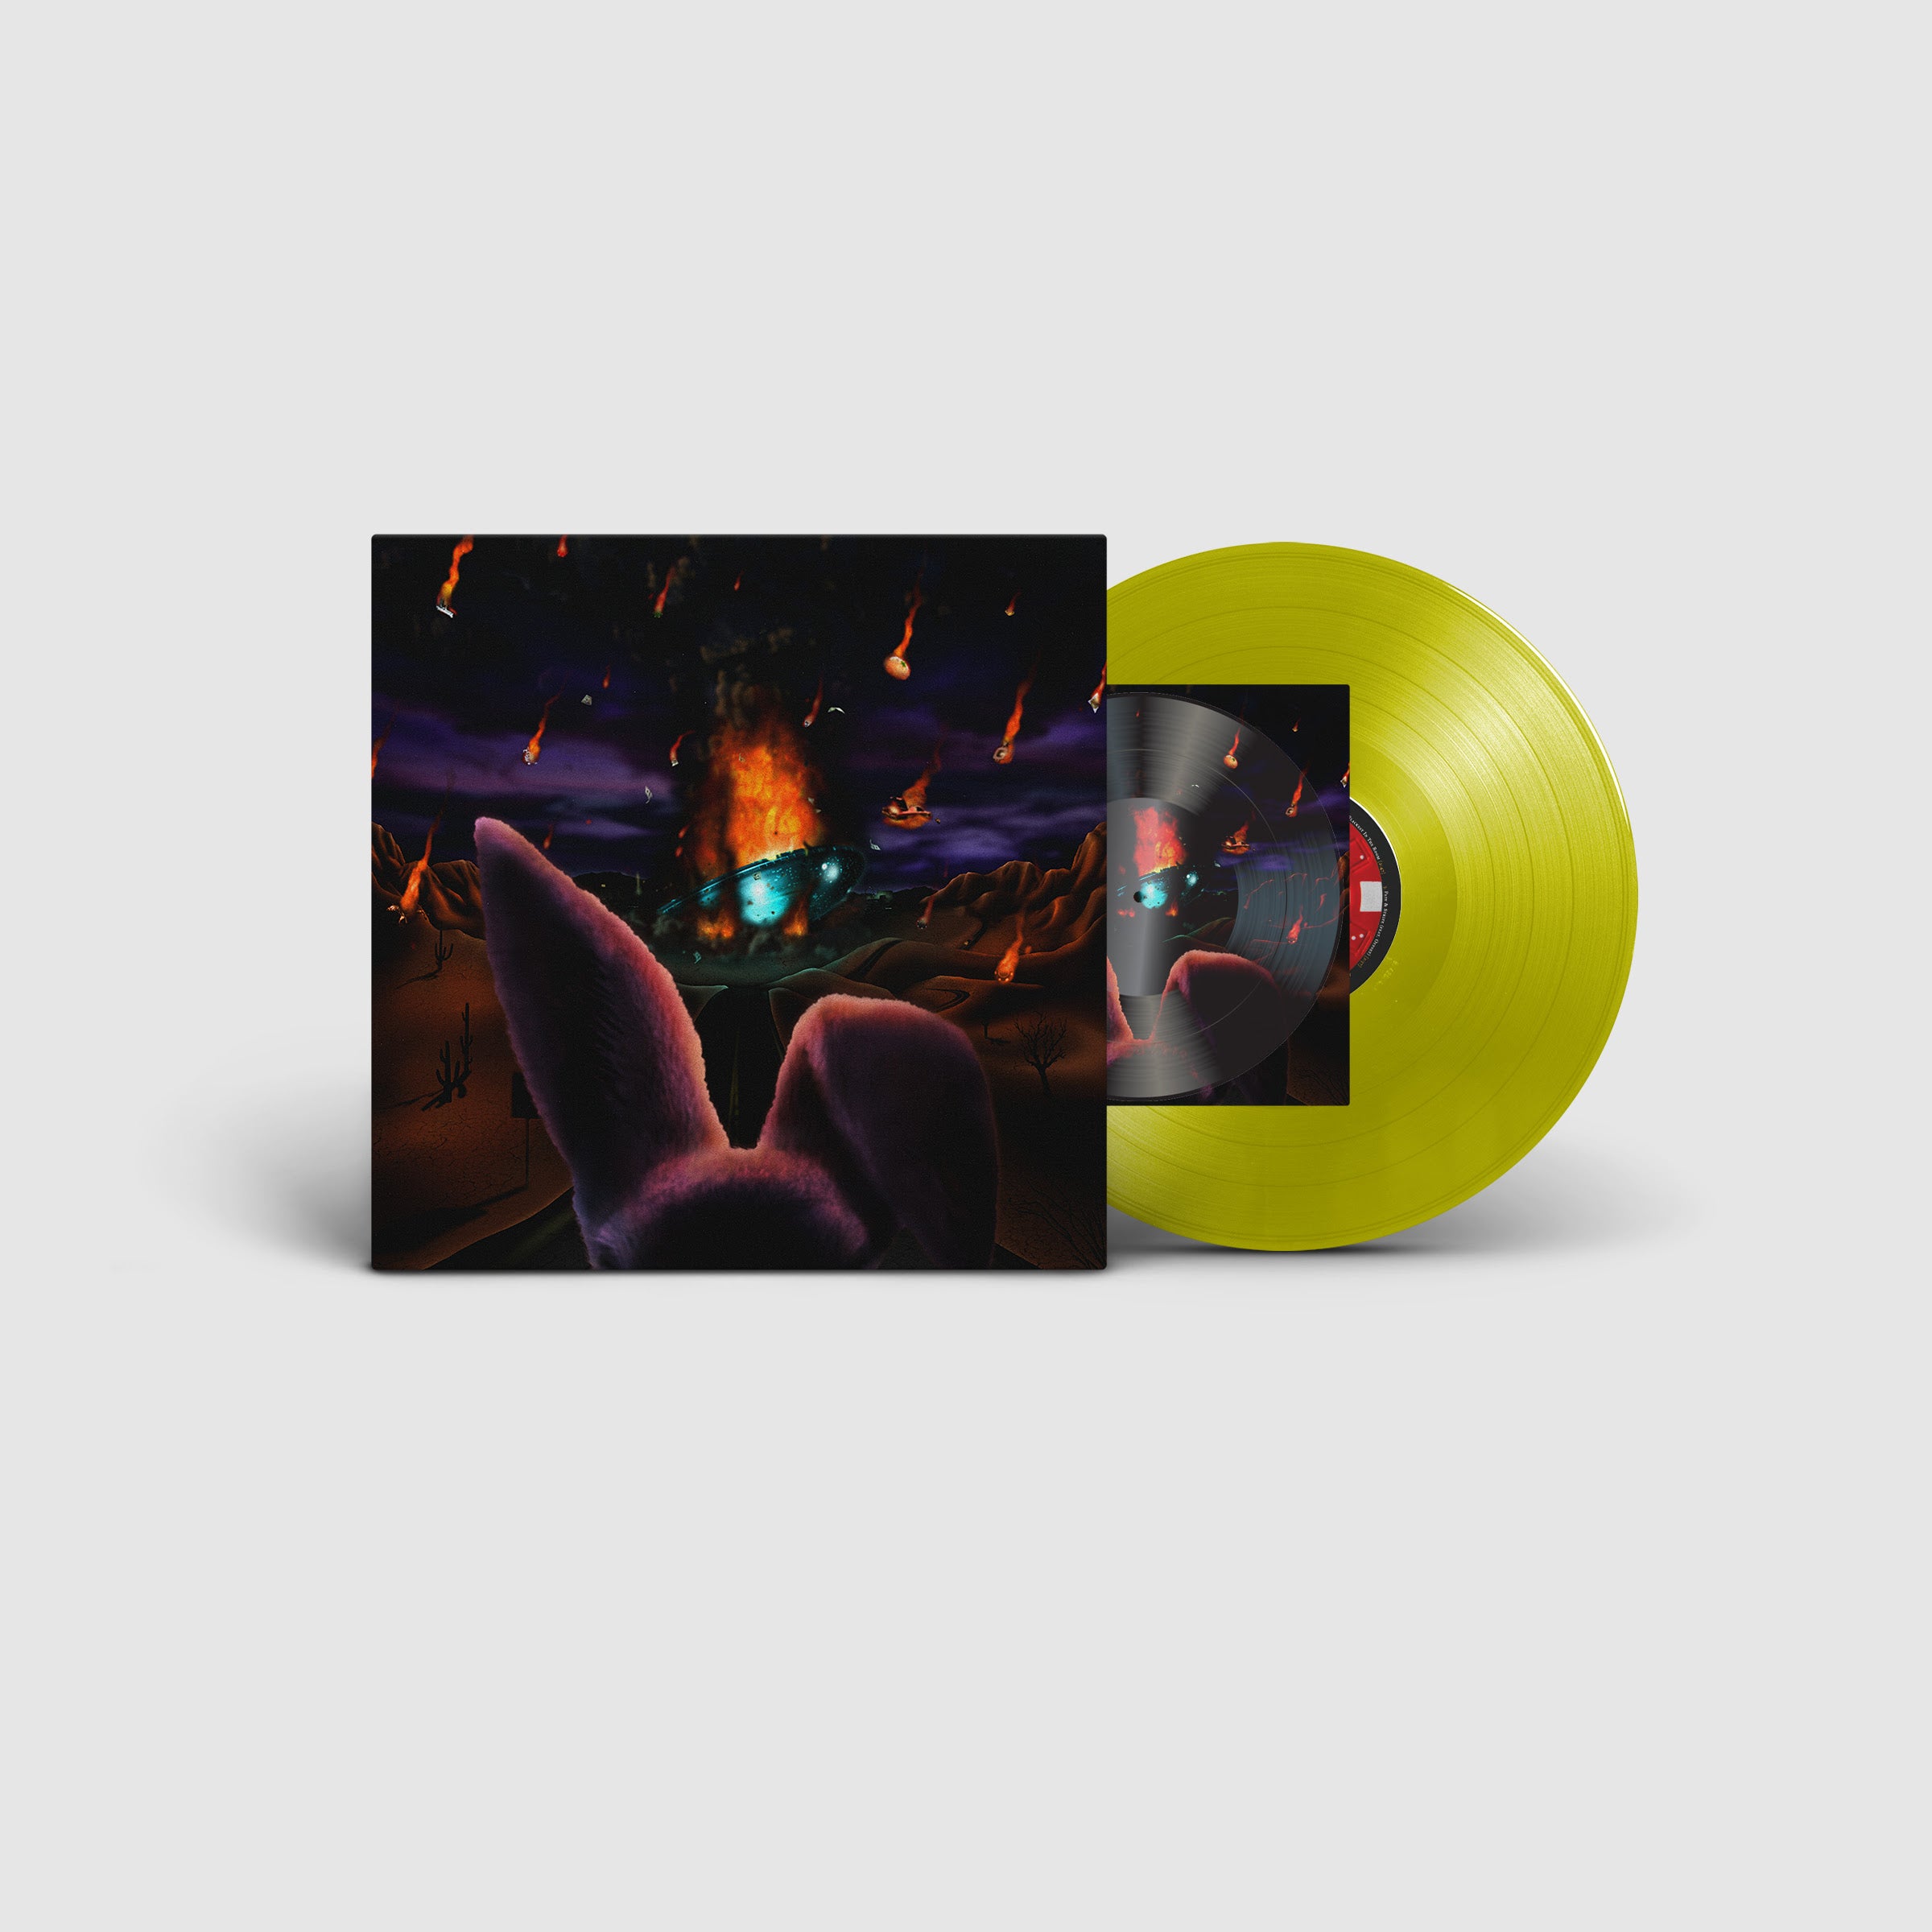 Freddie Gibbs | $oul $old $eparately (Indie Exclusive, Neon Yellow, includes flexi disc with one extra track) | Vinyl - 0